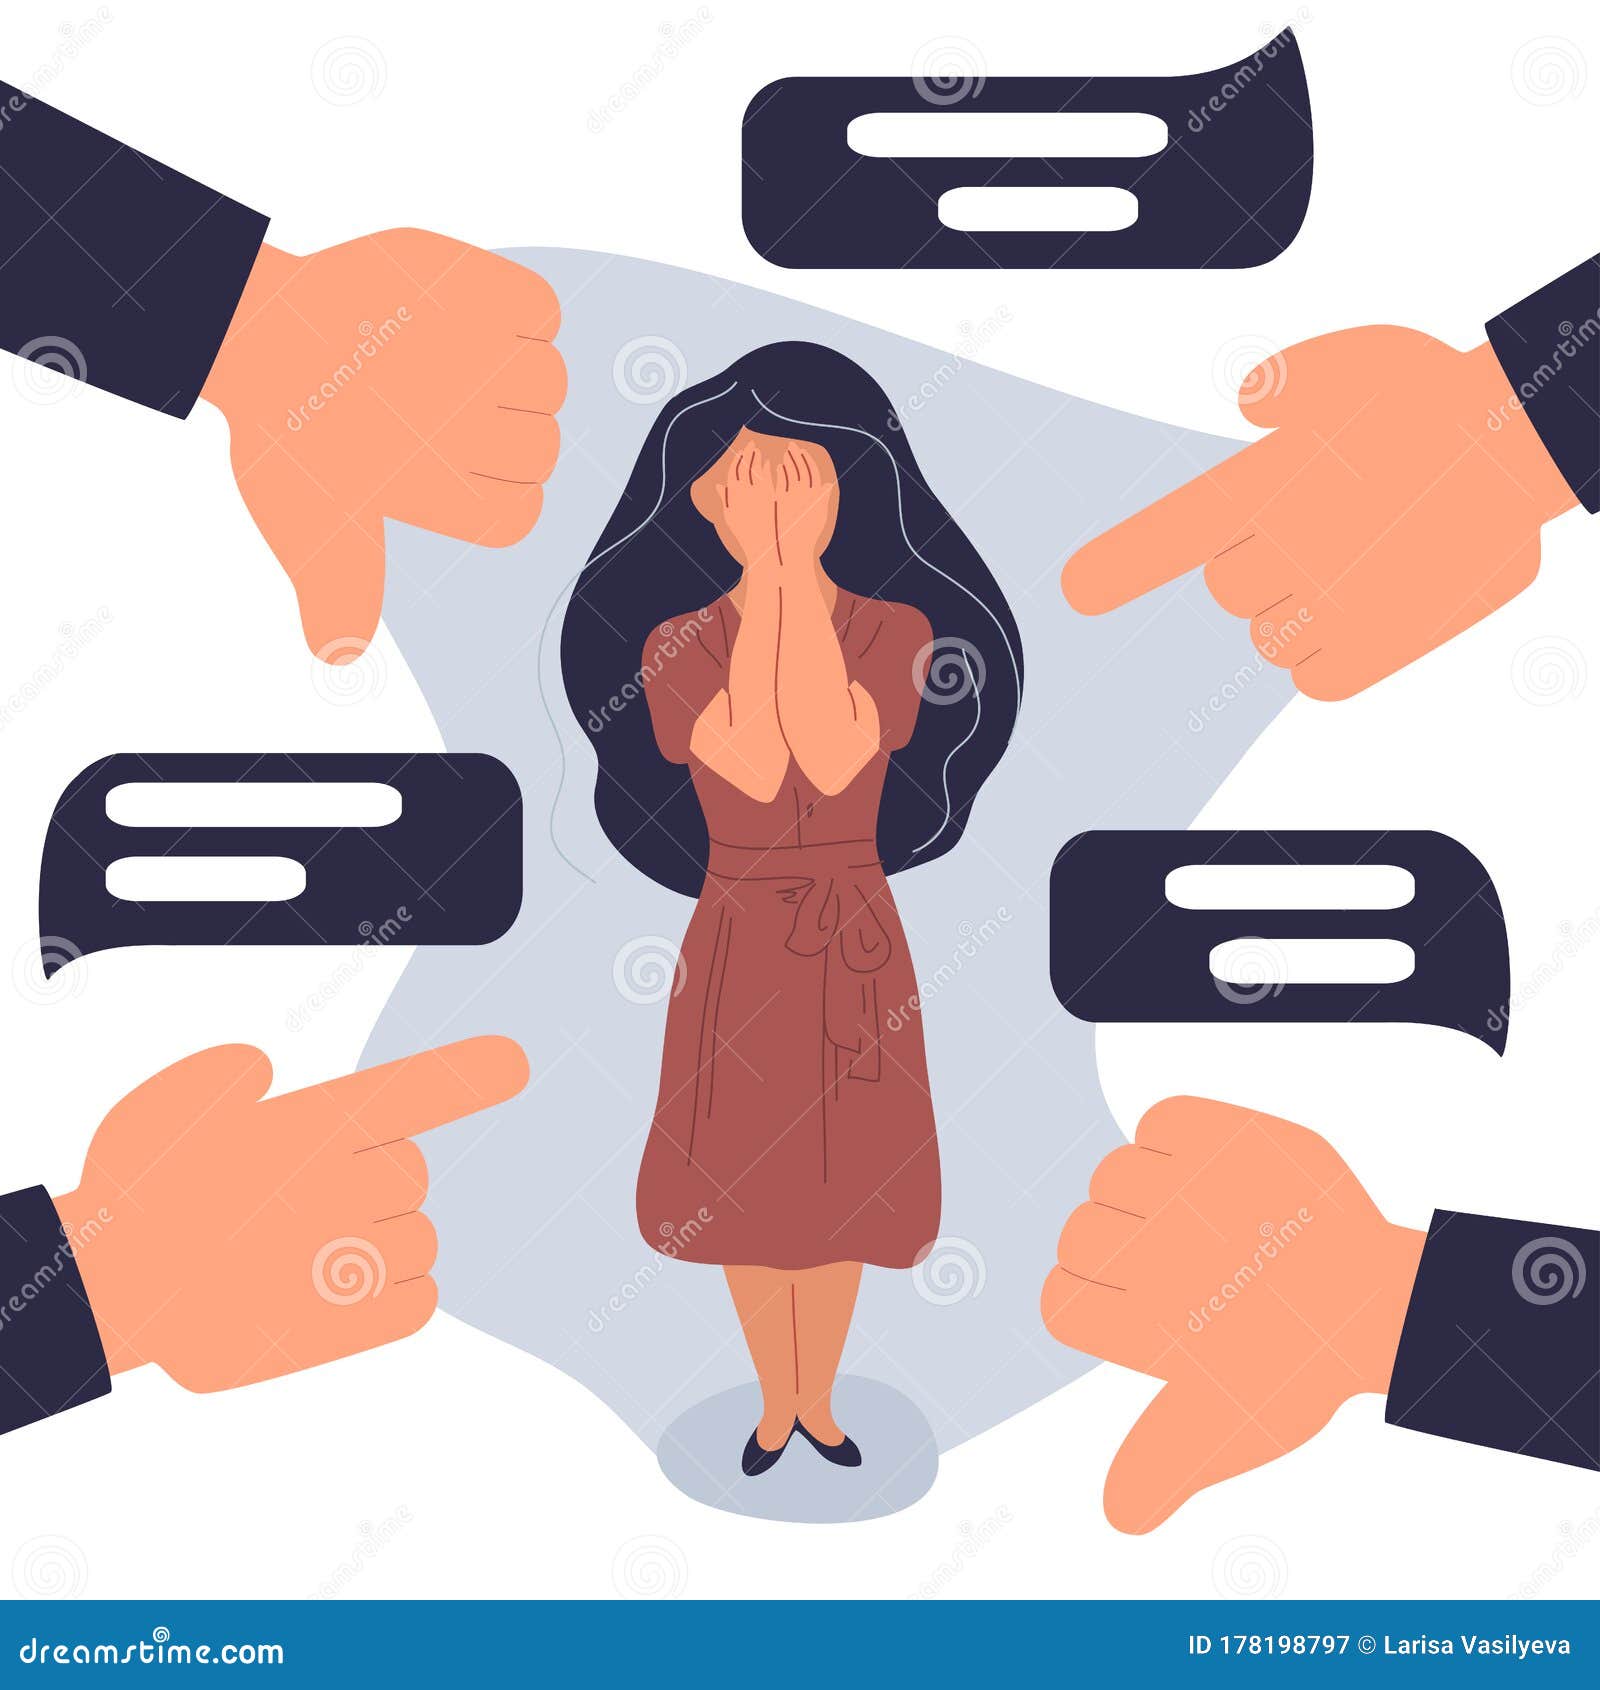 Cyberbullying Concept, Sad Women in Front of Laptop. Bully and Harass a  Girl Stock Vector - Illustration of abuse, concept: 178198797